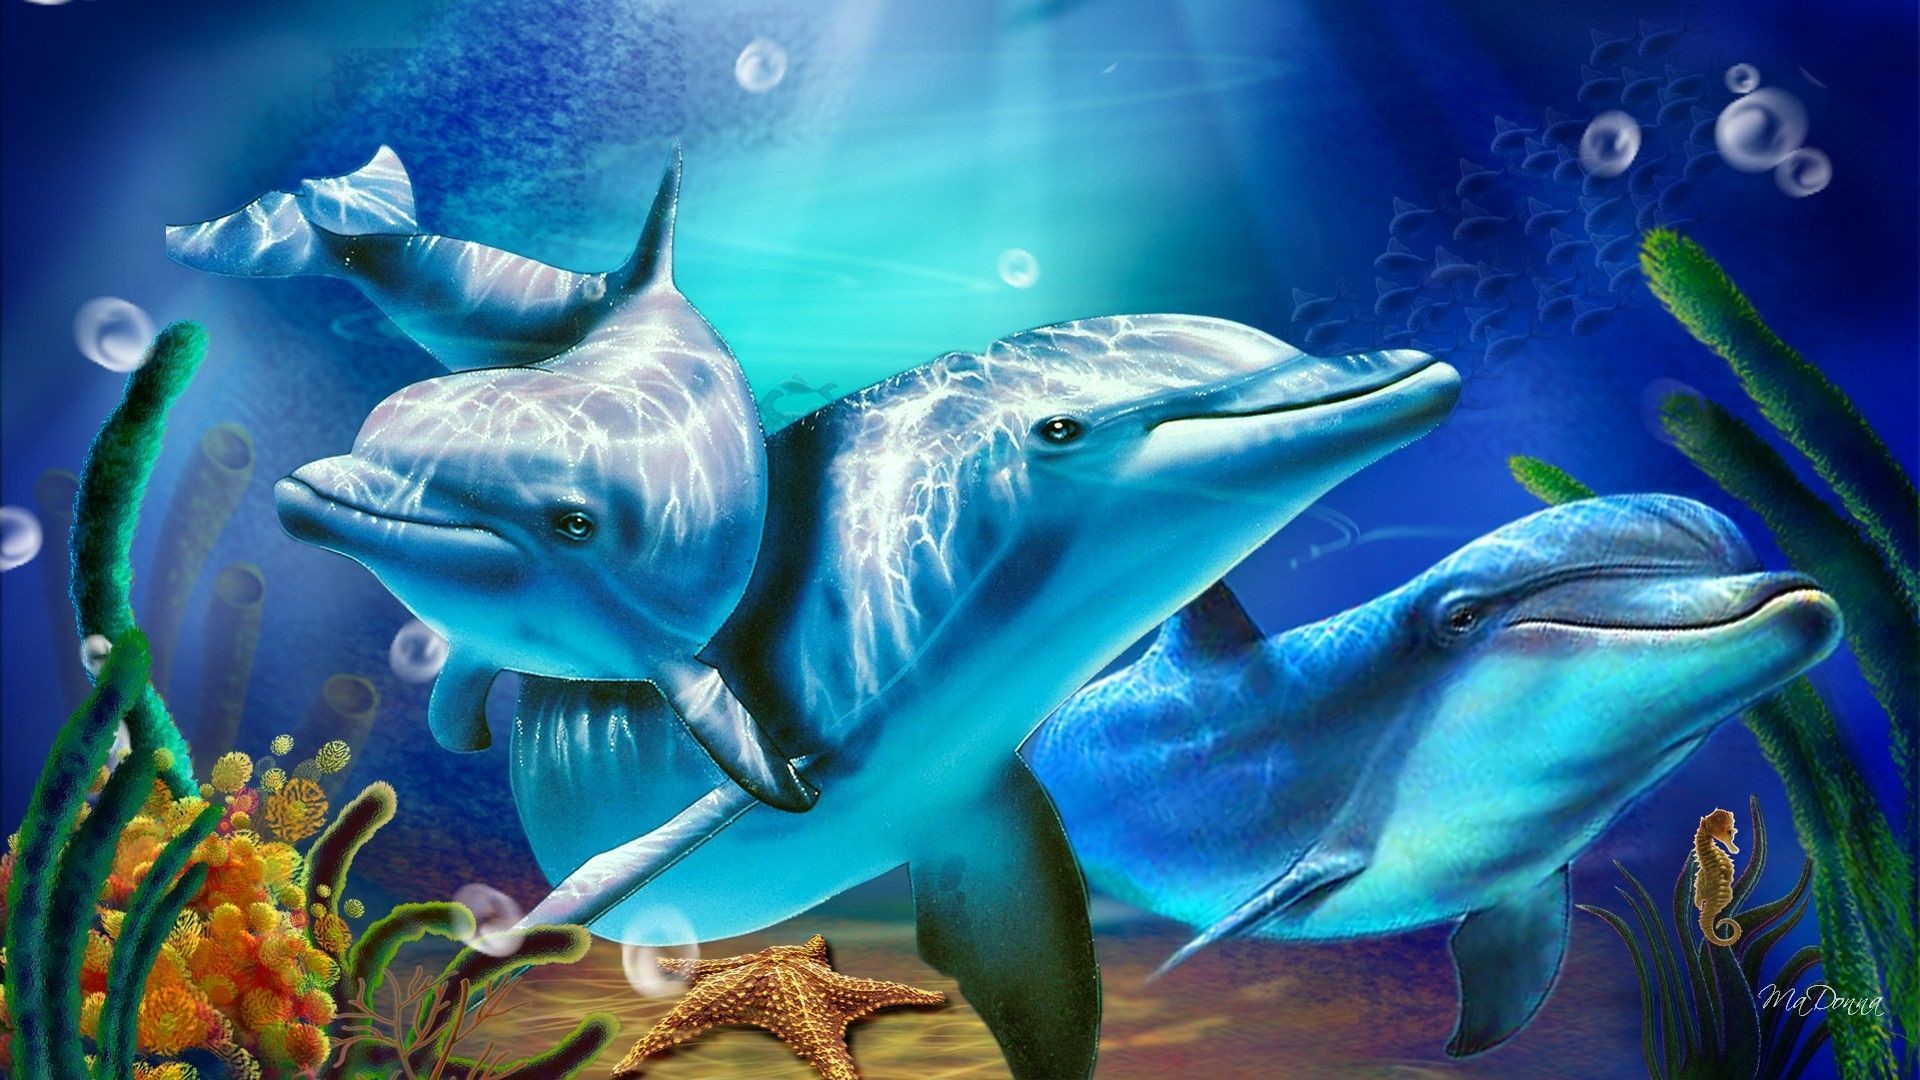 1920x1080 Dolphin Animated wallpapers : Find best latest Dolphin Animated wallpapers  in HD for your PC desktop background & mobile phones.